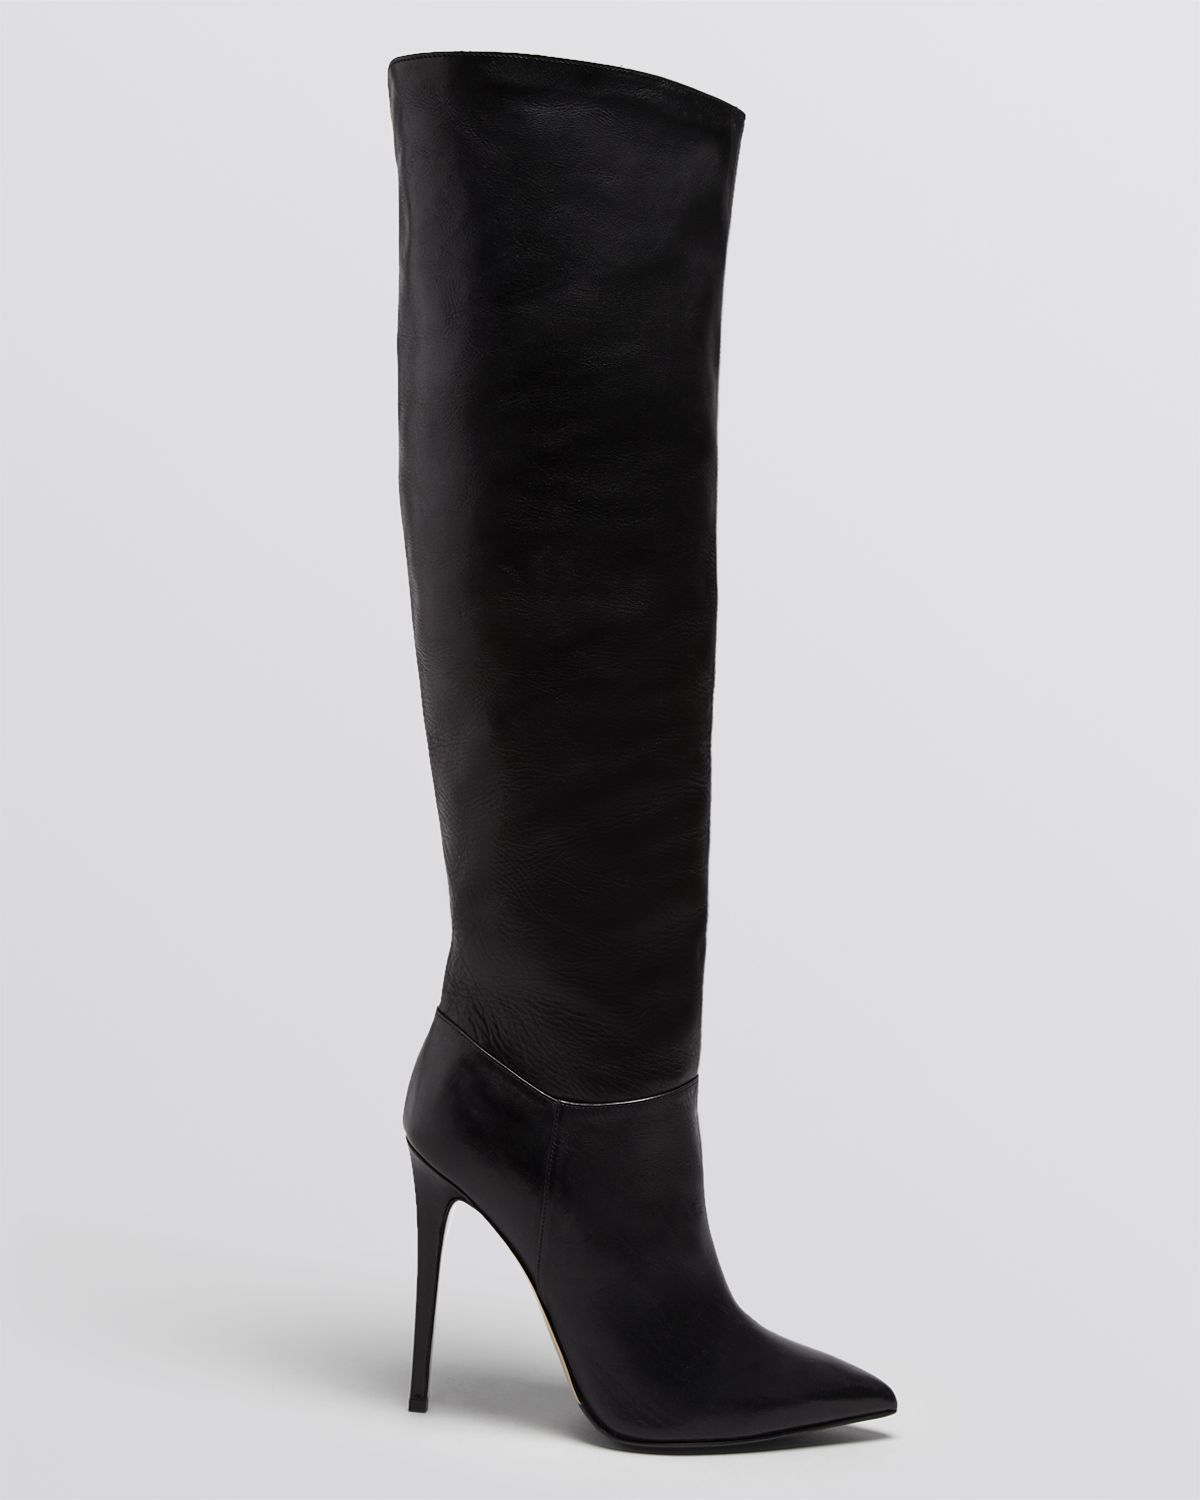 Le Silla Tall Pointed Toe High Heel Boots in Black - Lyst